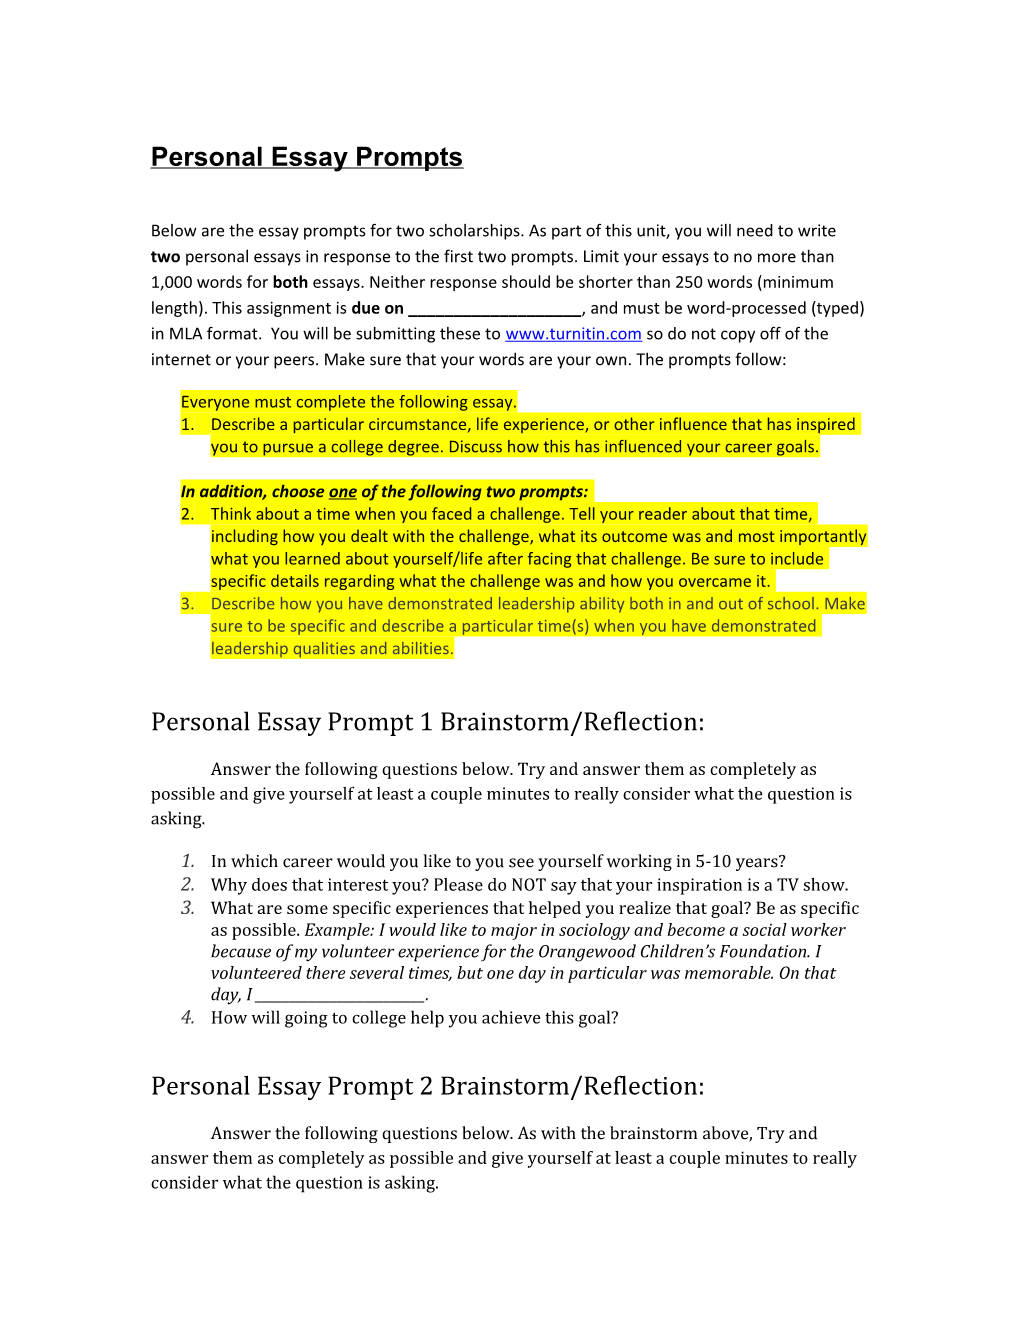 Personal Essay Prompts